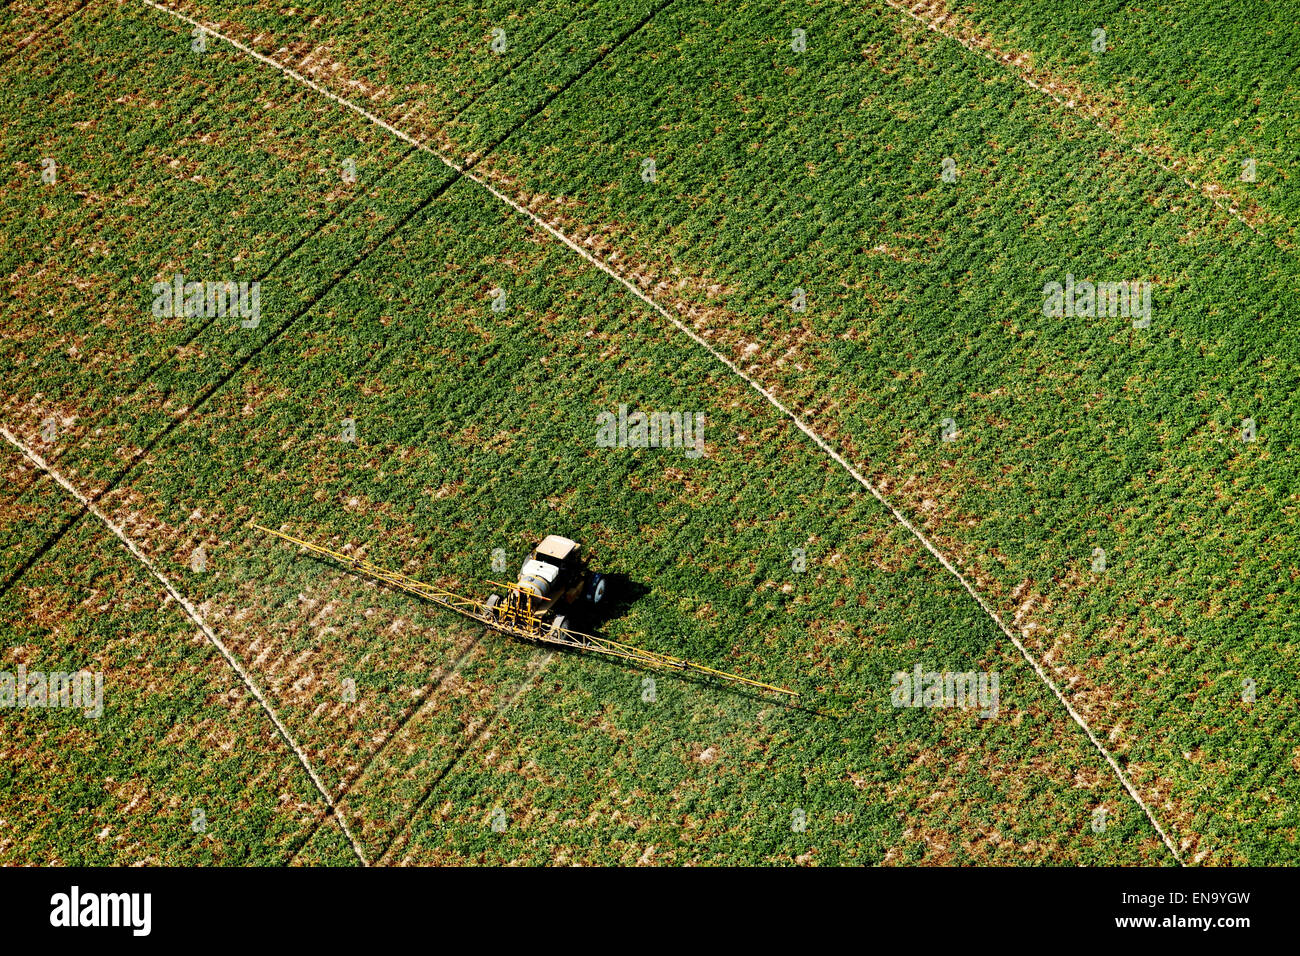 A modern agricultural crop sprayer, spraying chemicals on a farm field. Stock Photo